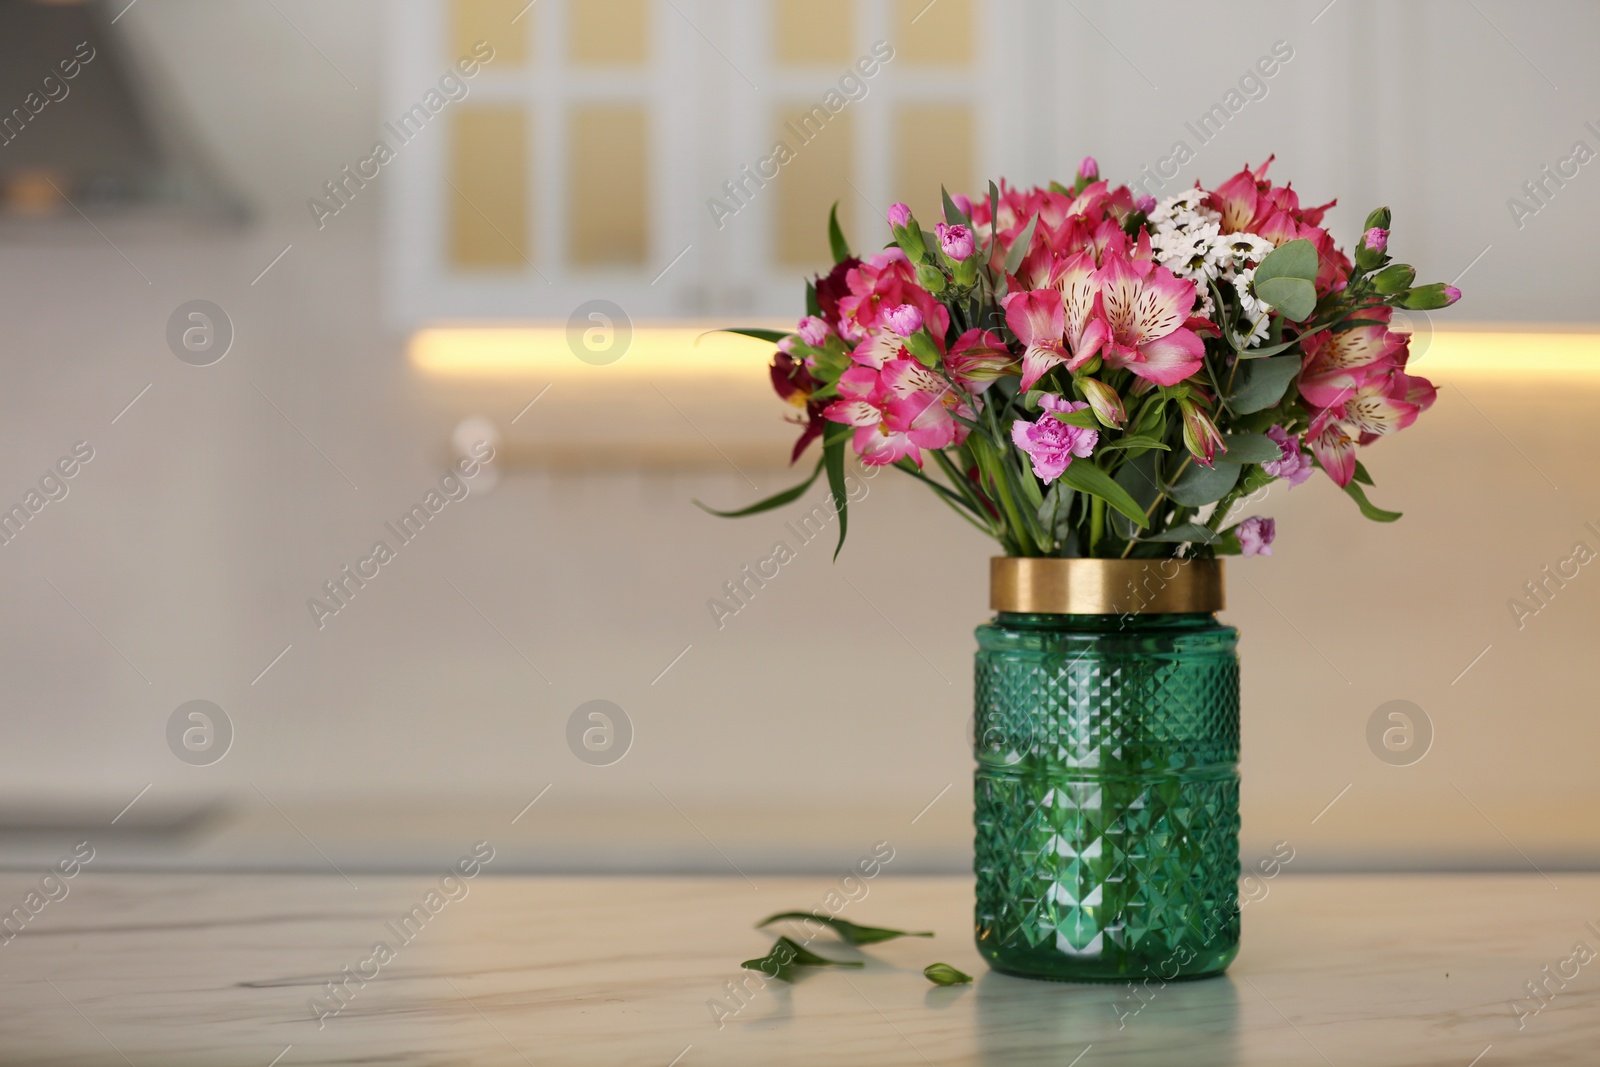 Photo of Vase with beautiful alstroemeria flowers on table in kitchen, space for text. Interior design